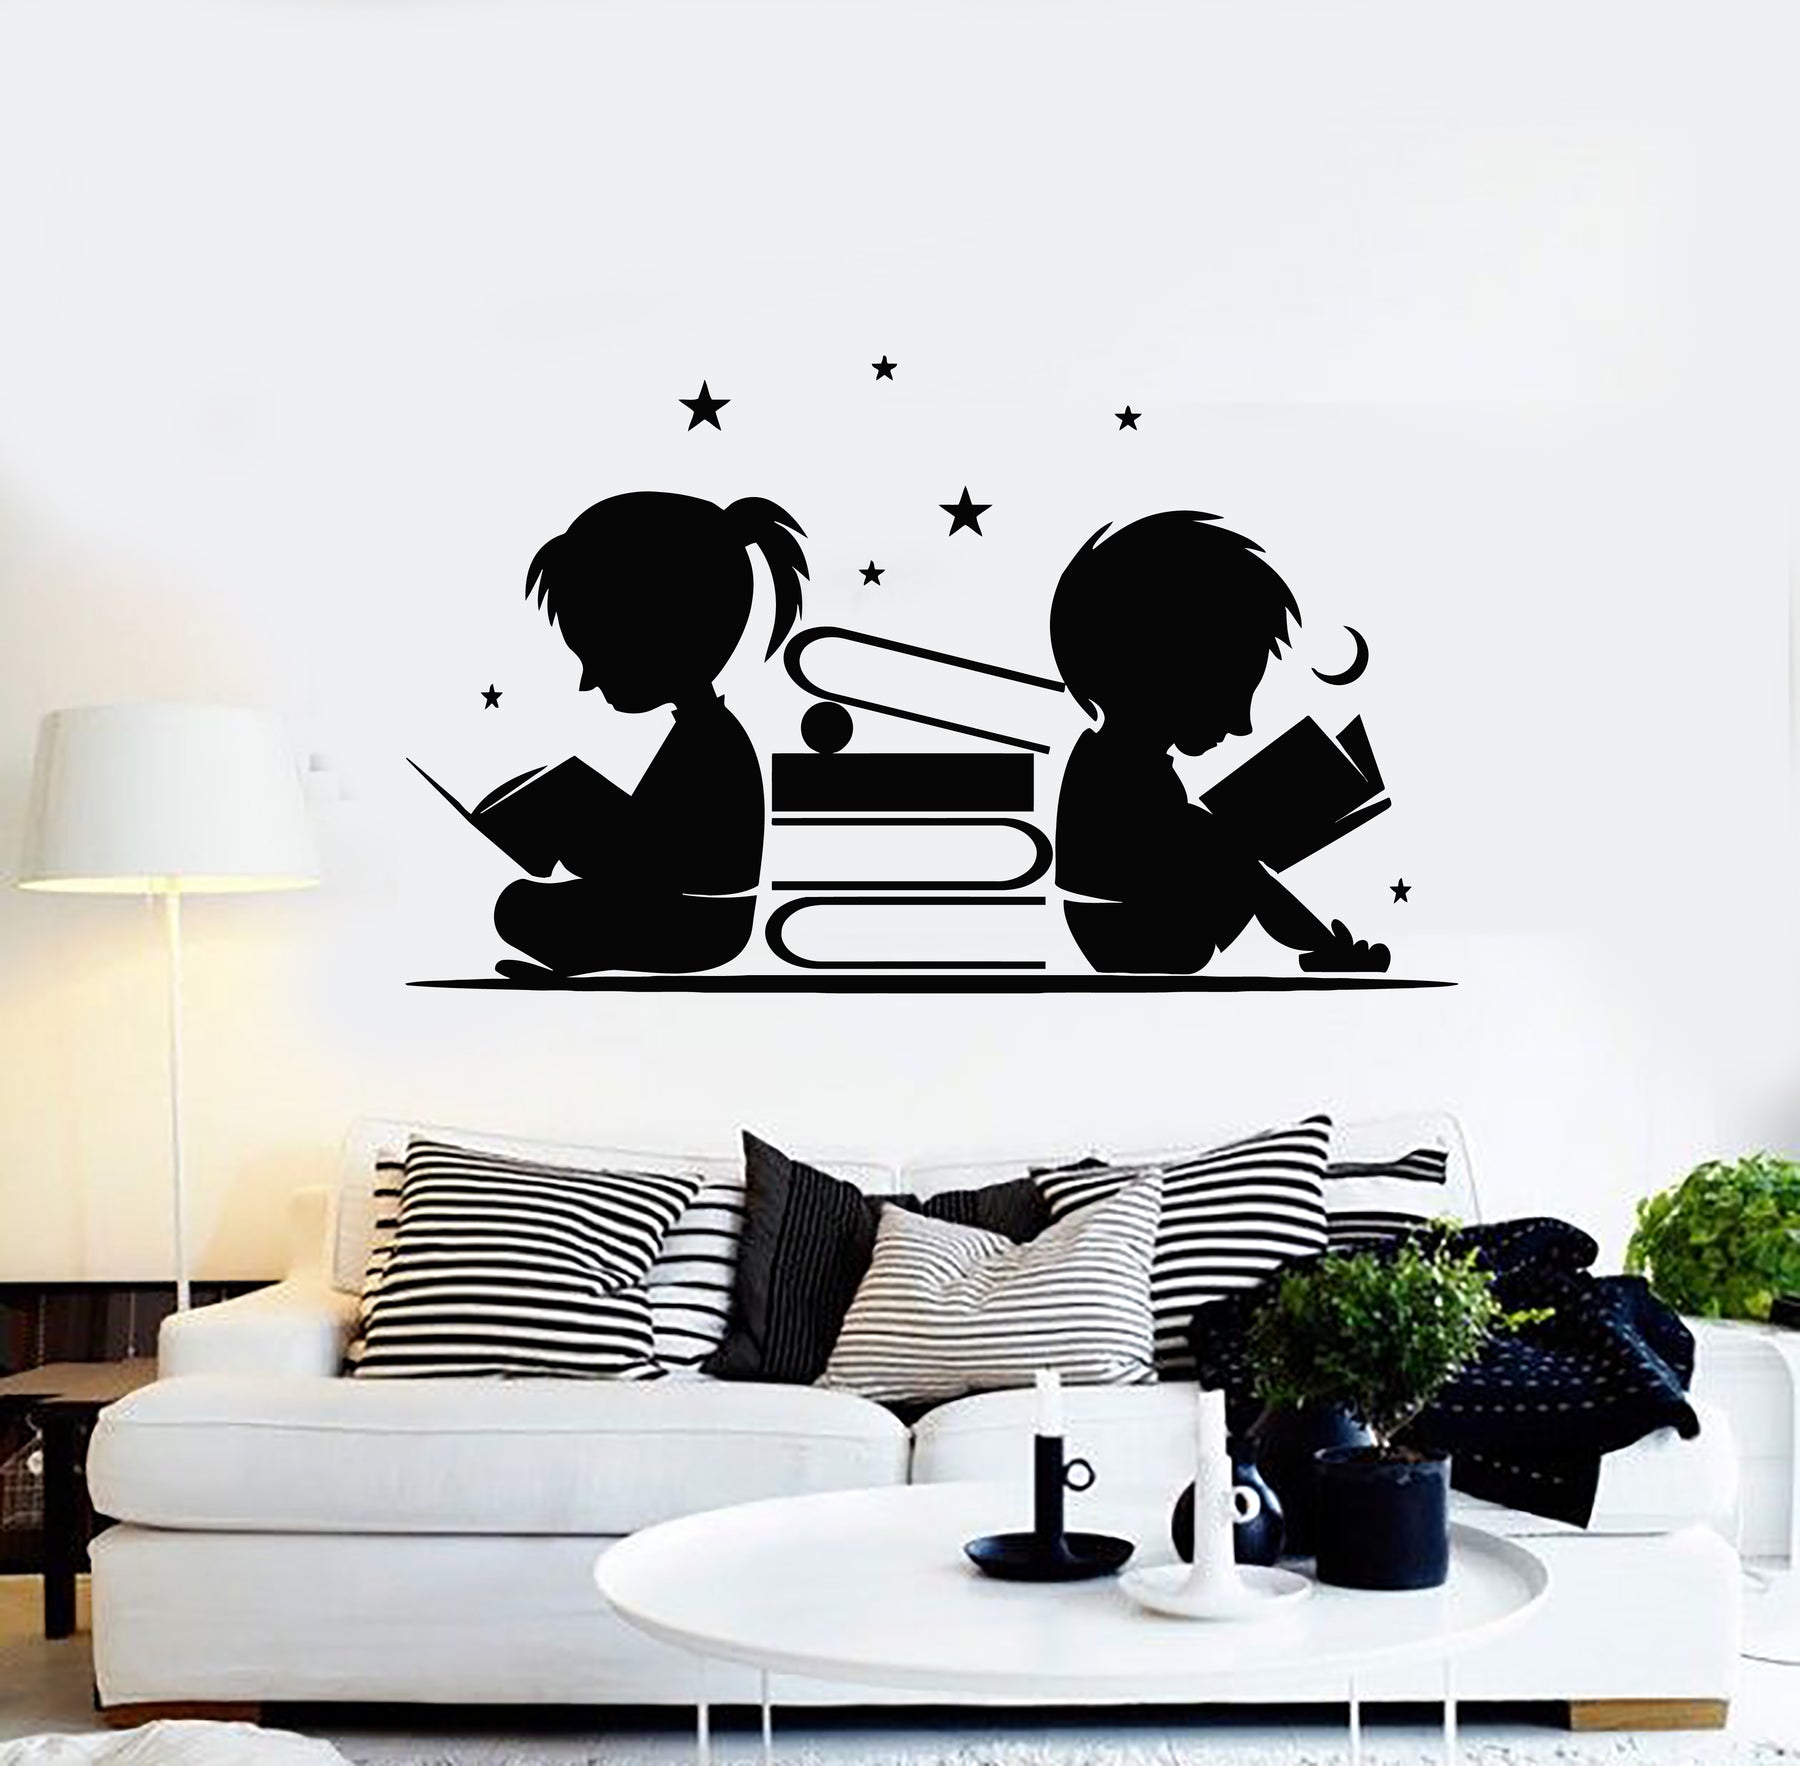 two year guarantee girl or boy reading books with quote